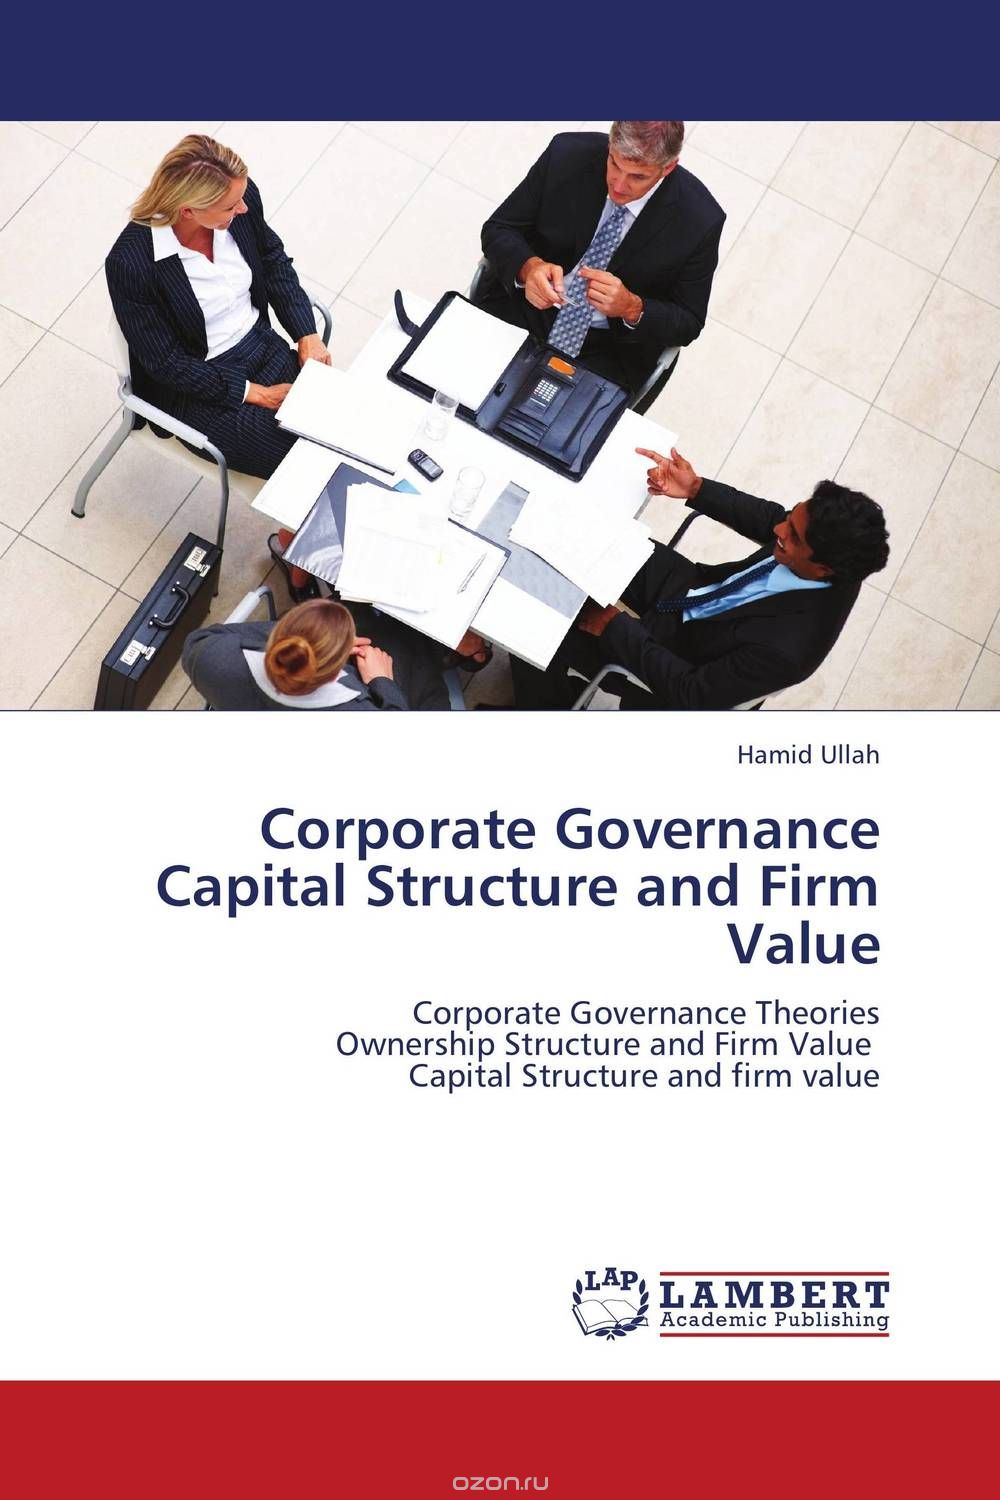 Corporate Governance Capital Structure and Firm Value